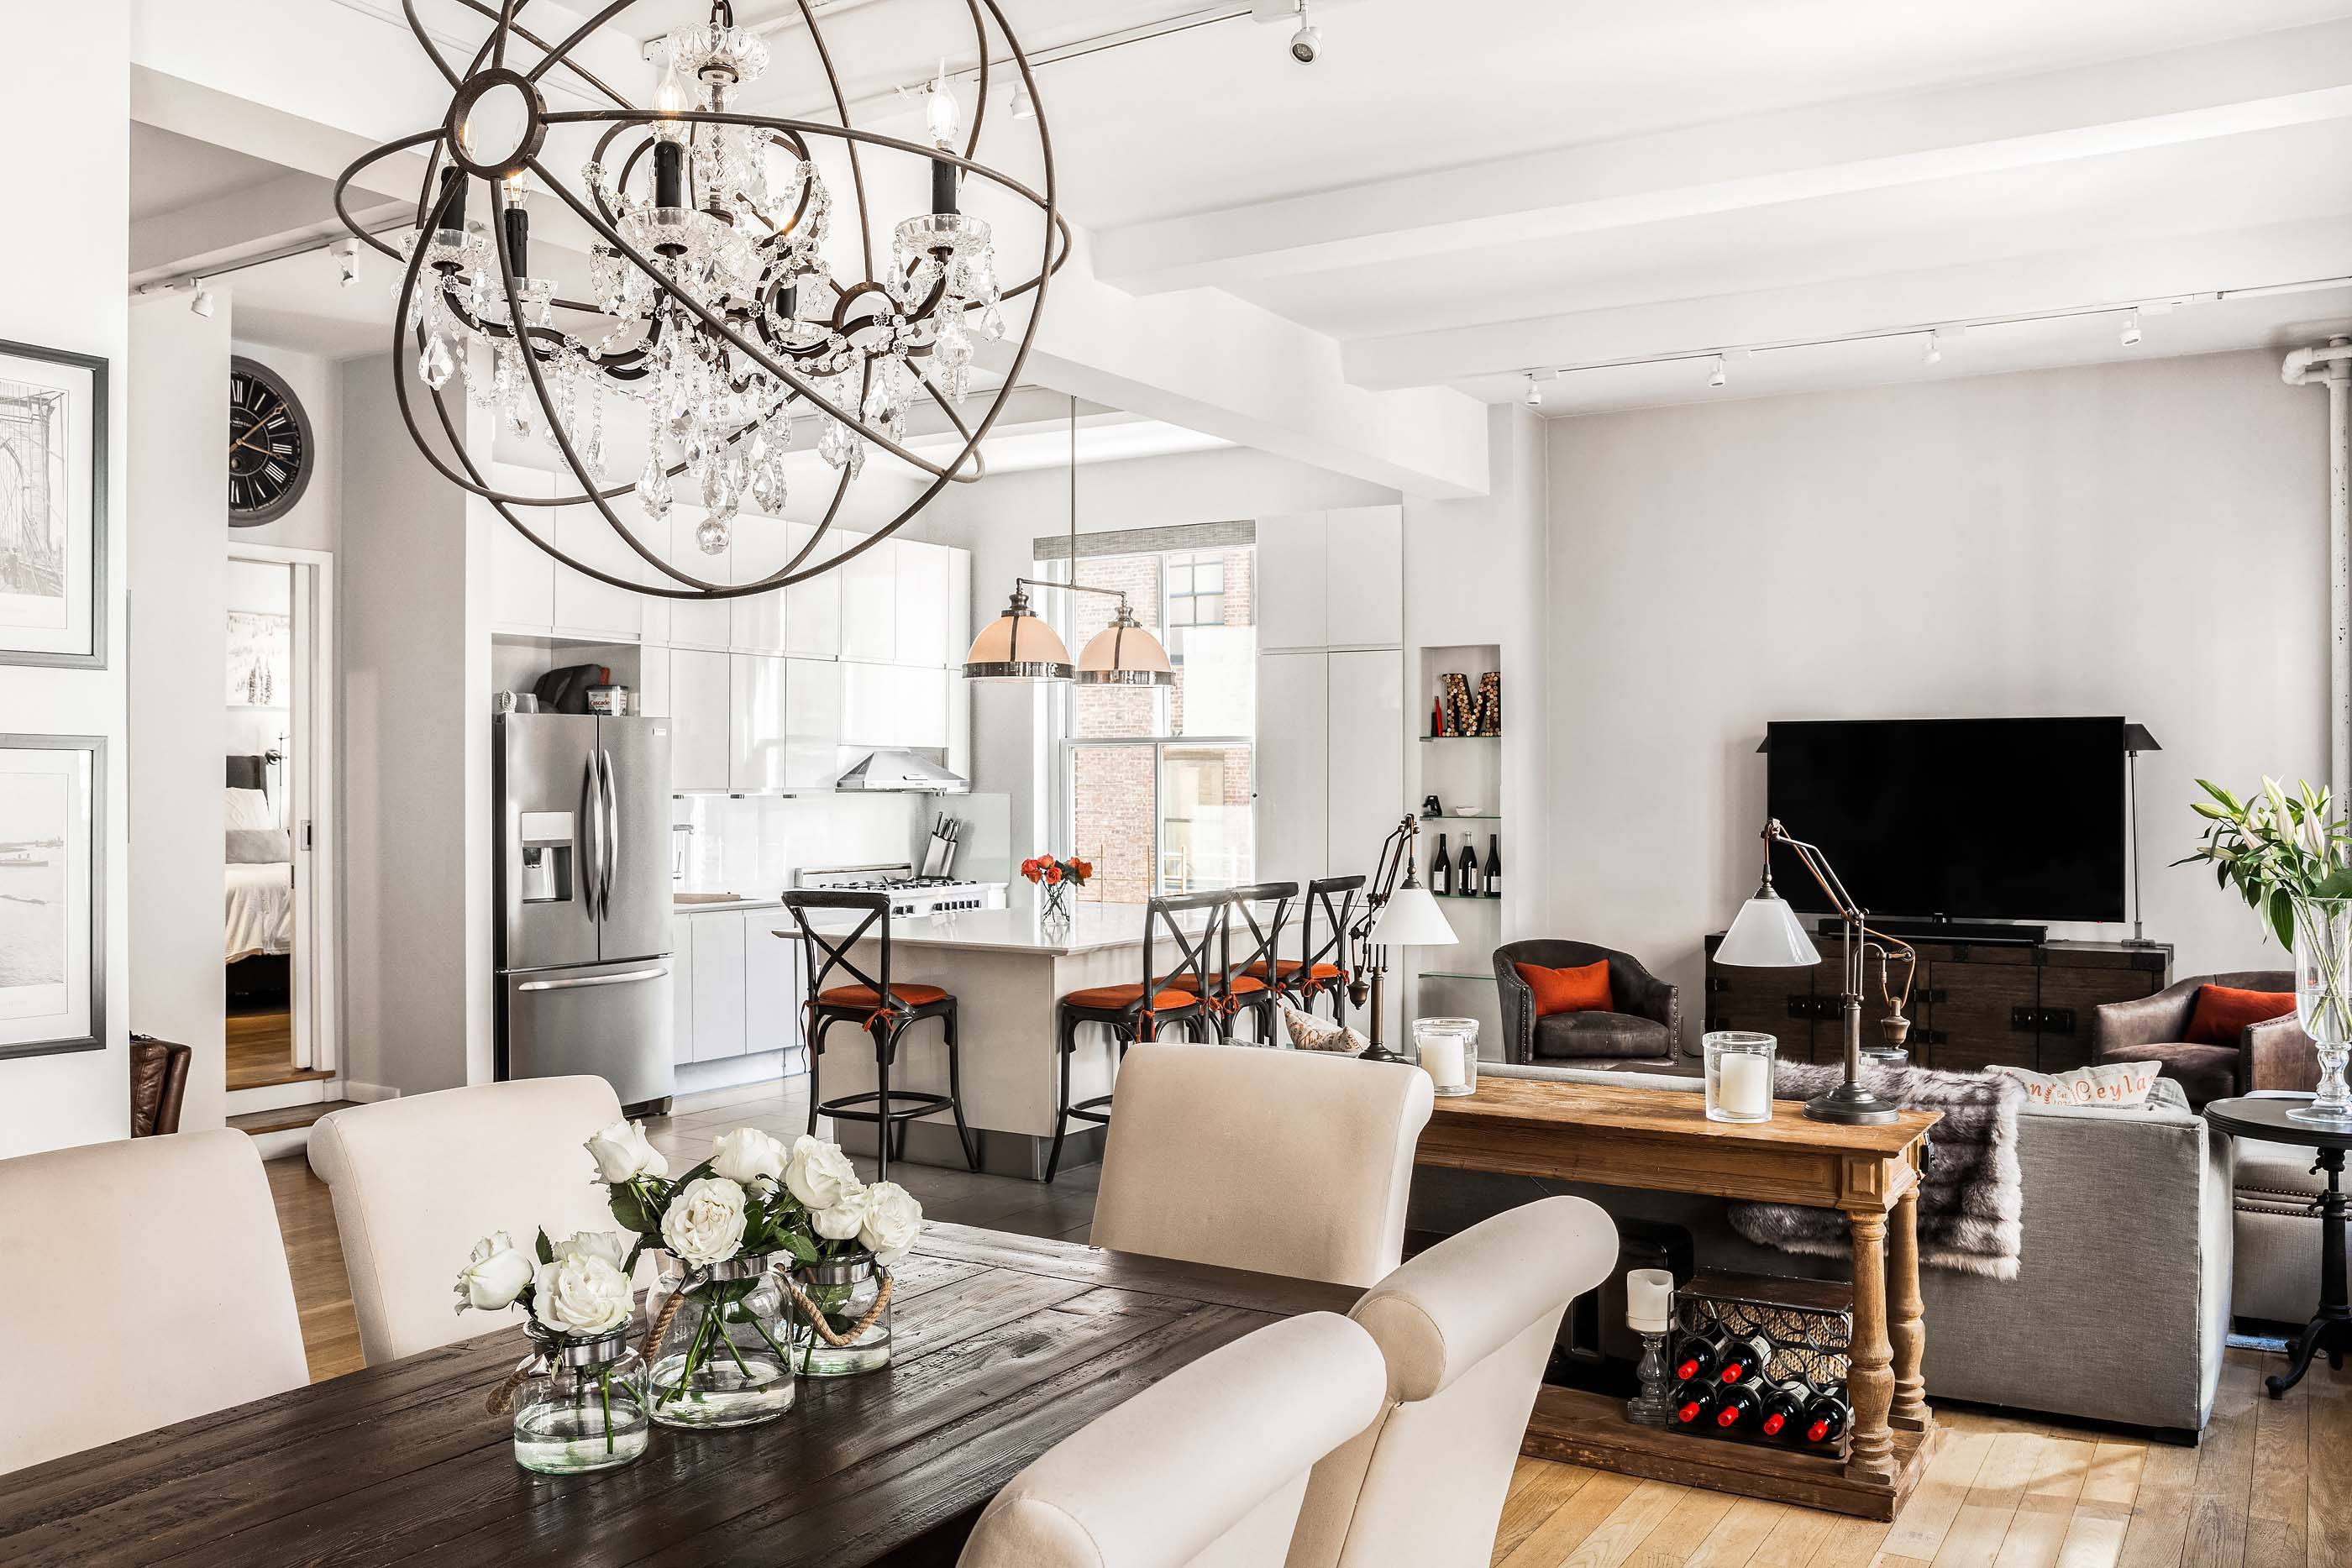 Triple exposure, renovated, bright high floor three bedroom loft on the border of Gramercy and Flatiron, now available for its next lucky owner.